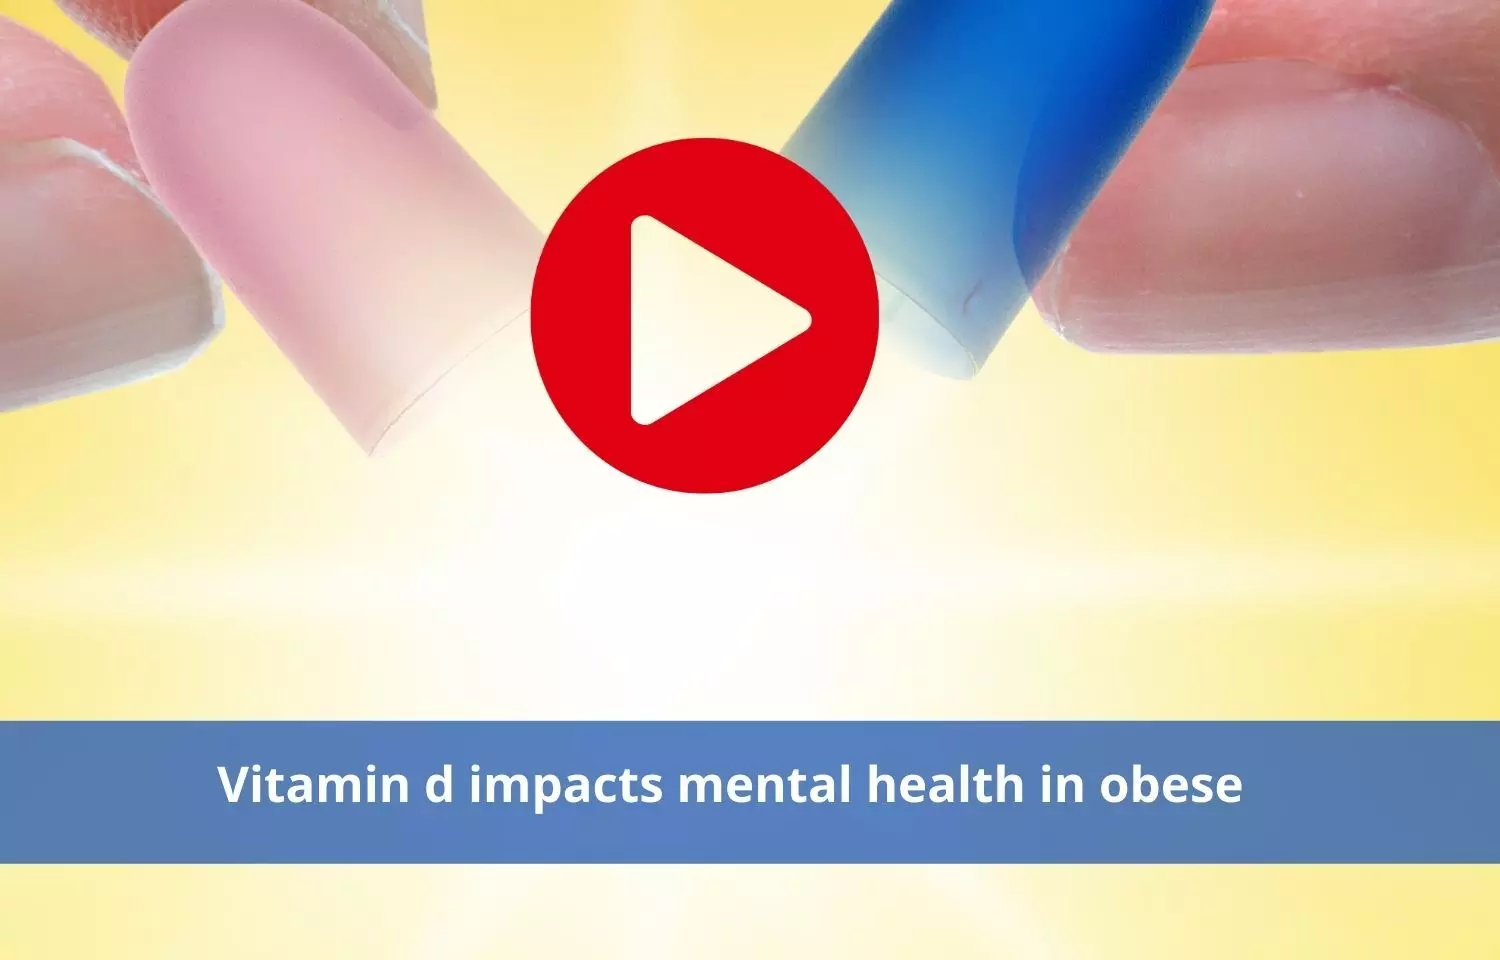 Vitamin D to affect mental health in obese patients